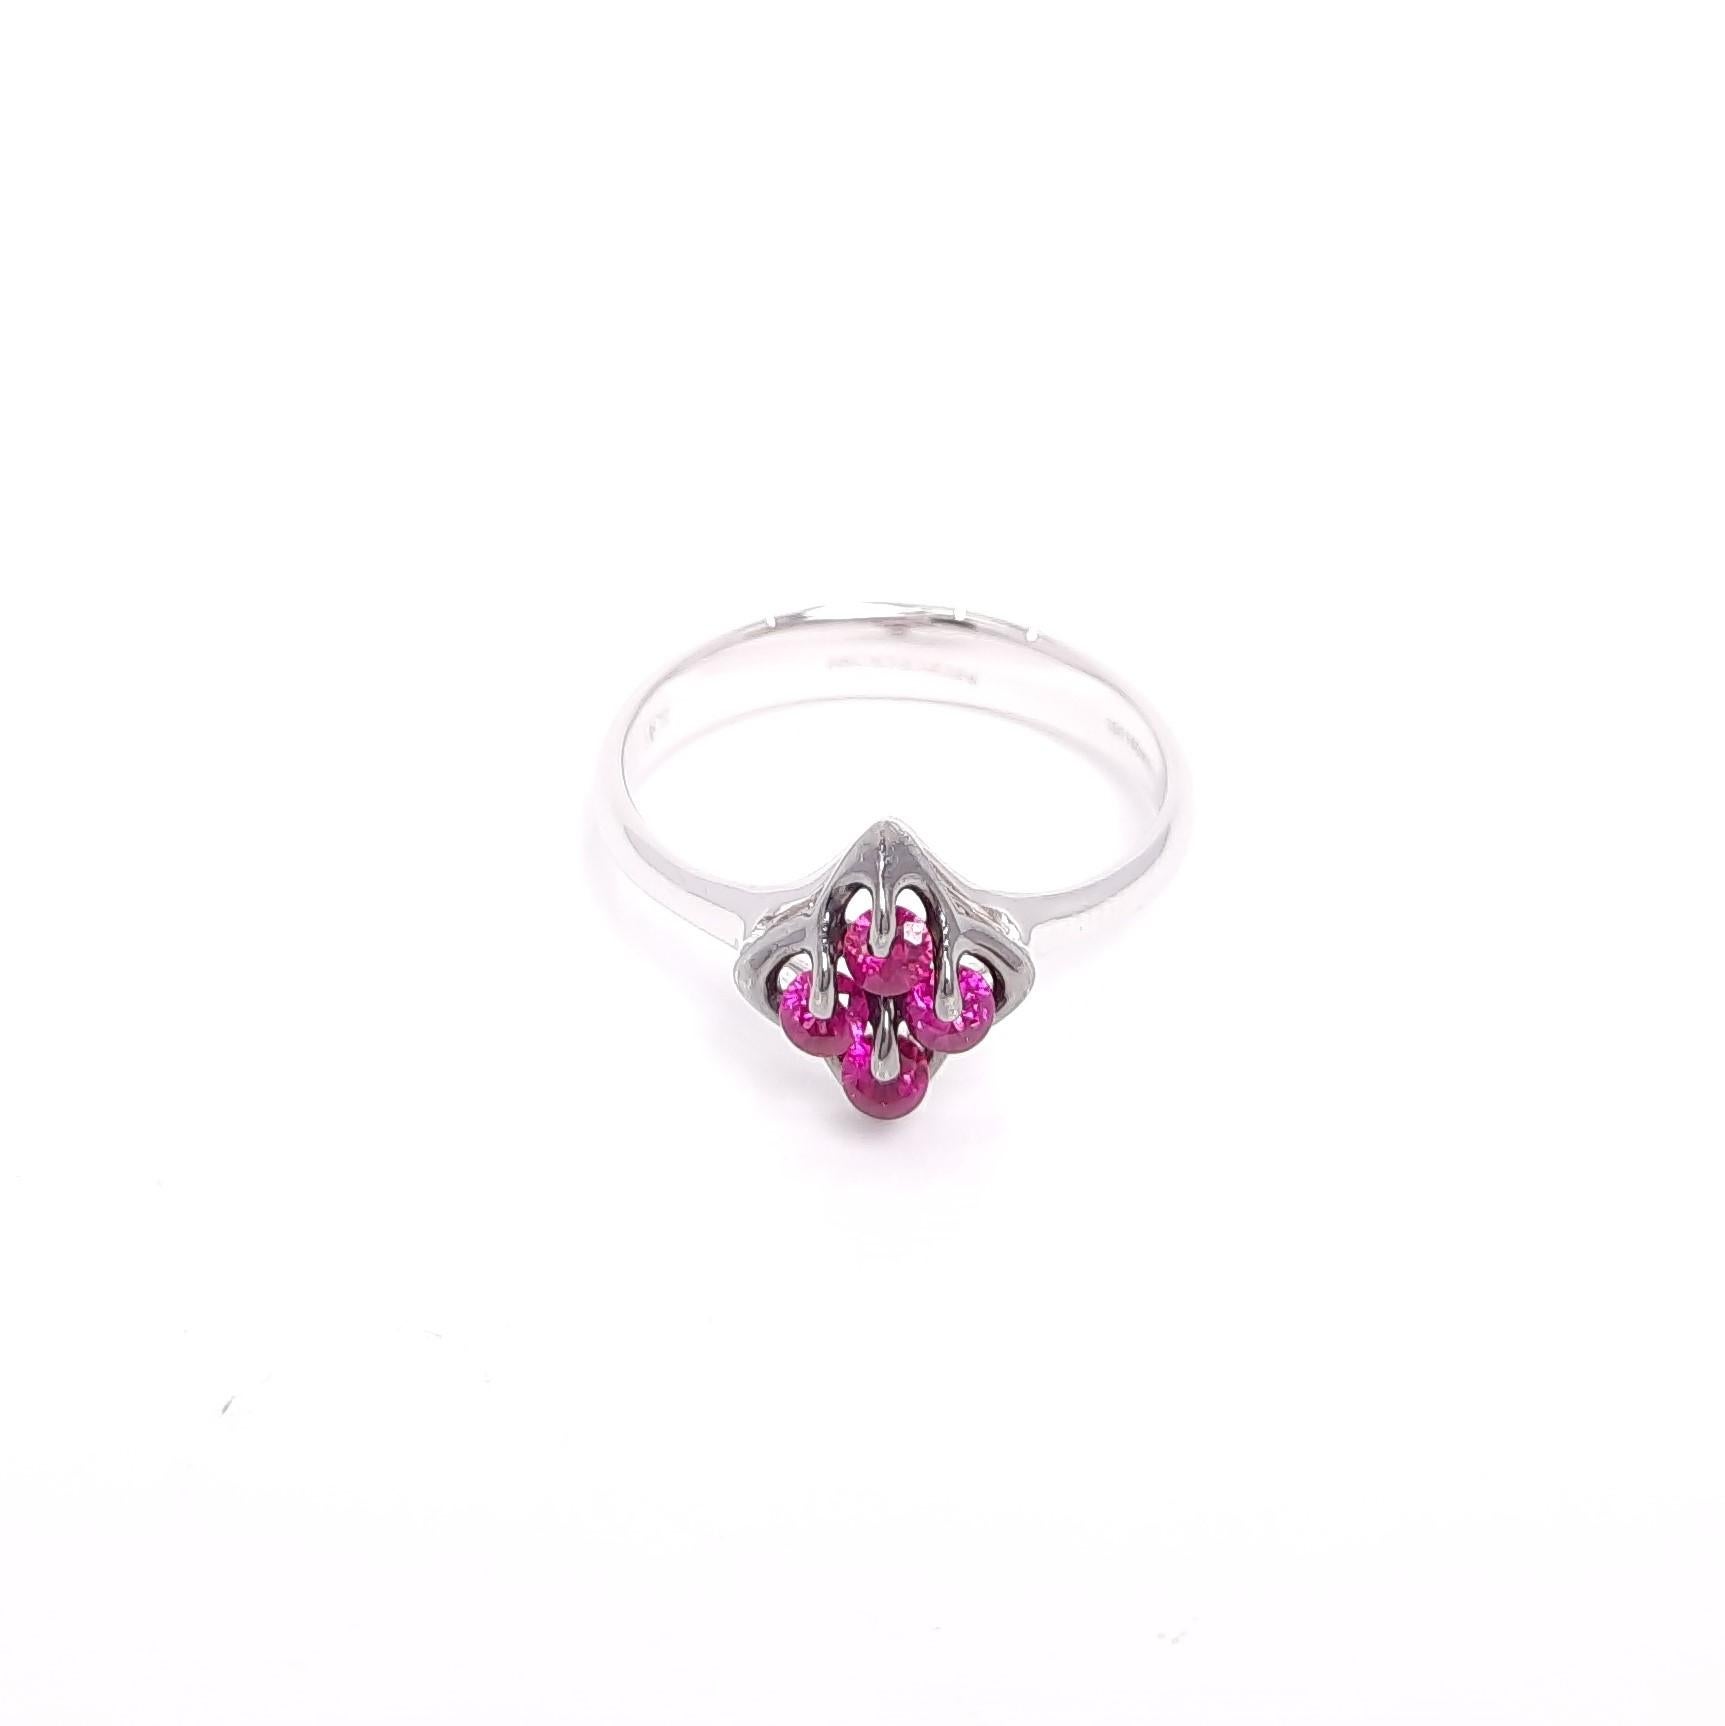 Inspired by the famous Russian Ballet, the Prima Star Ruby Ring created by MOISEIKIN® charm your day with the exceptional hue and uniqueness. The design is created with patented Russian setting technology, in which a gemstone trembles and rotates